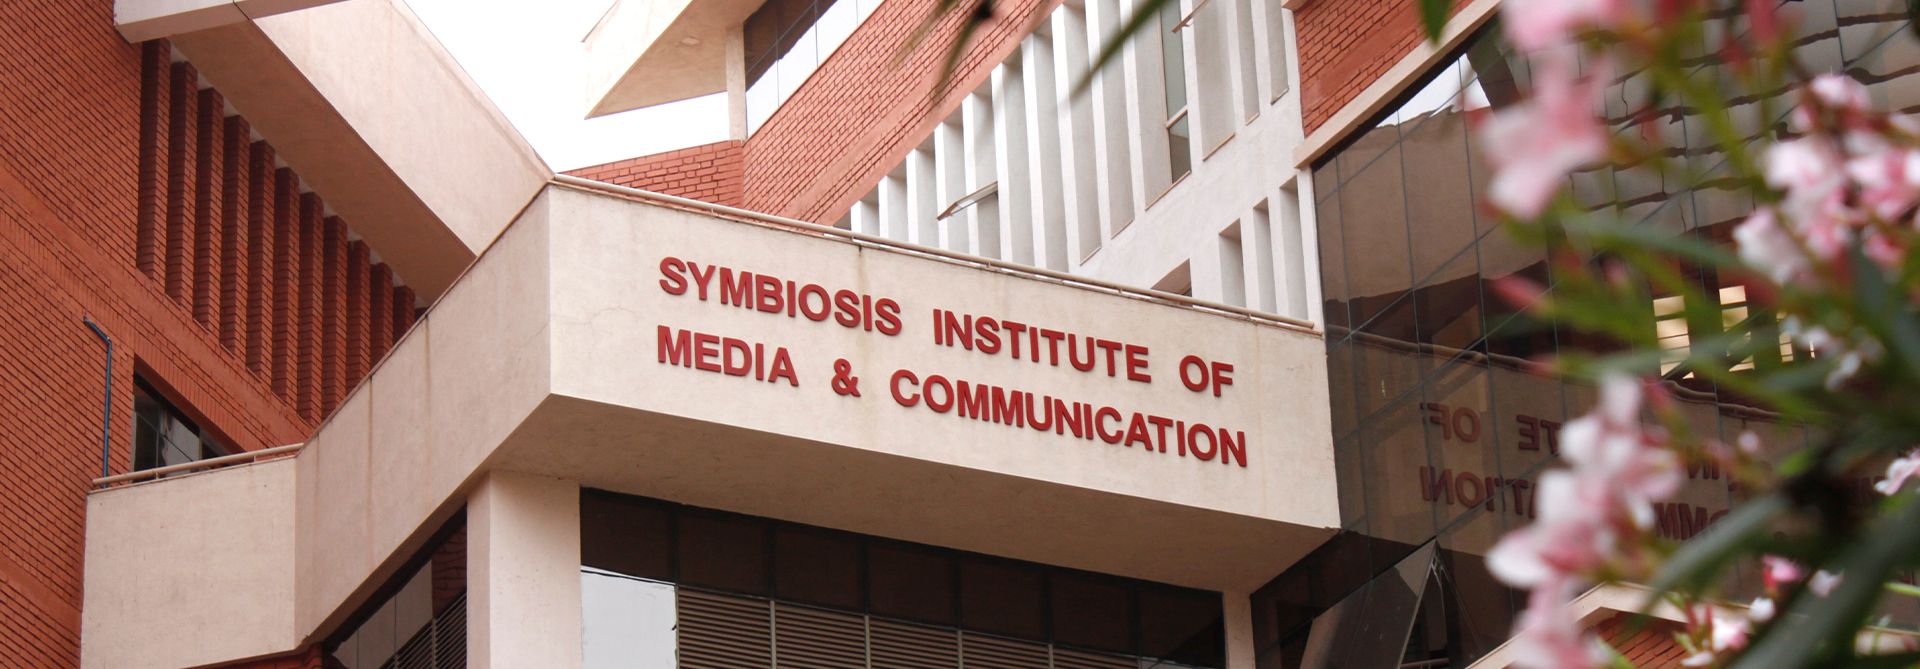 About Symbiosis Centre for Media & Communication Pune